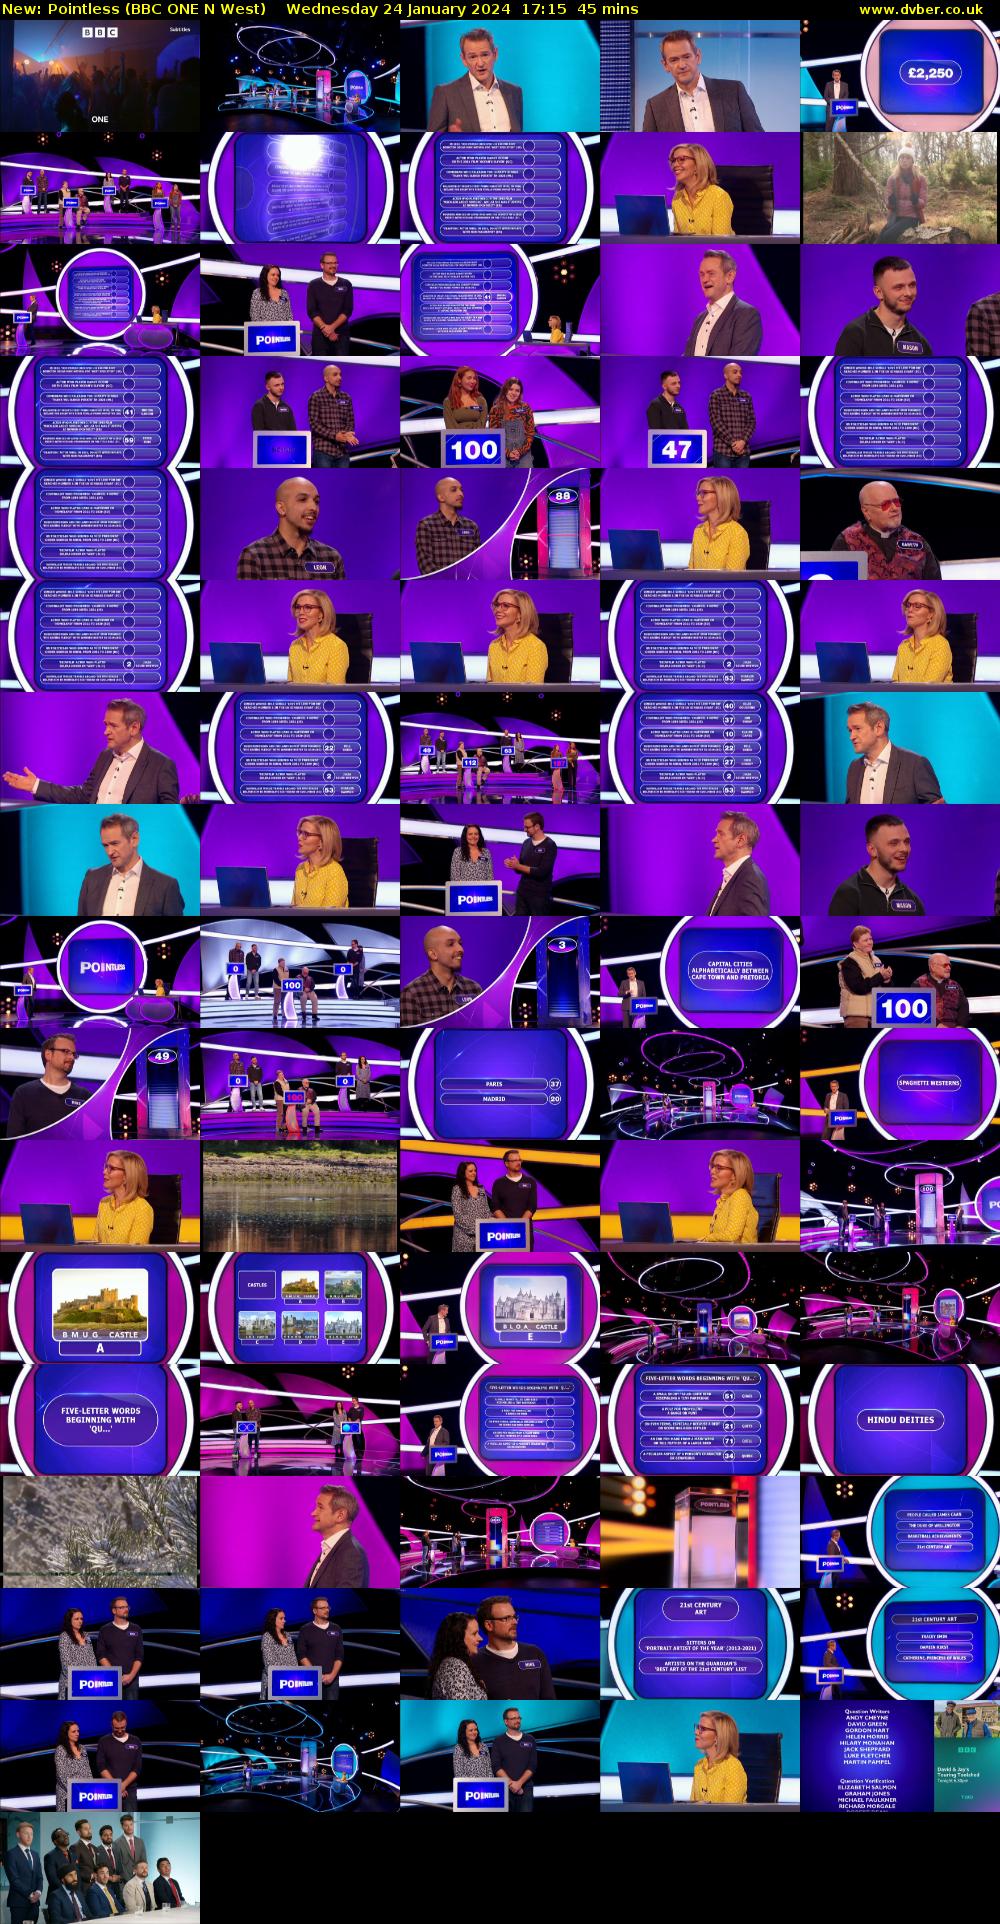 Pointless (BBC ONE N West) Wednesday 24 January 2024 17:15 - 18:00